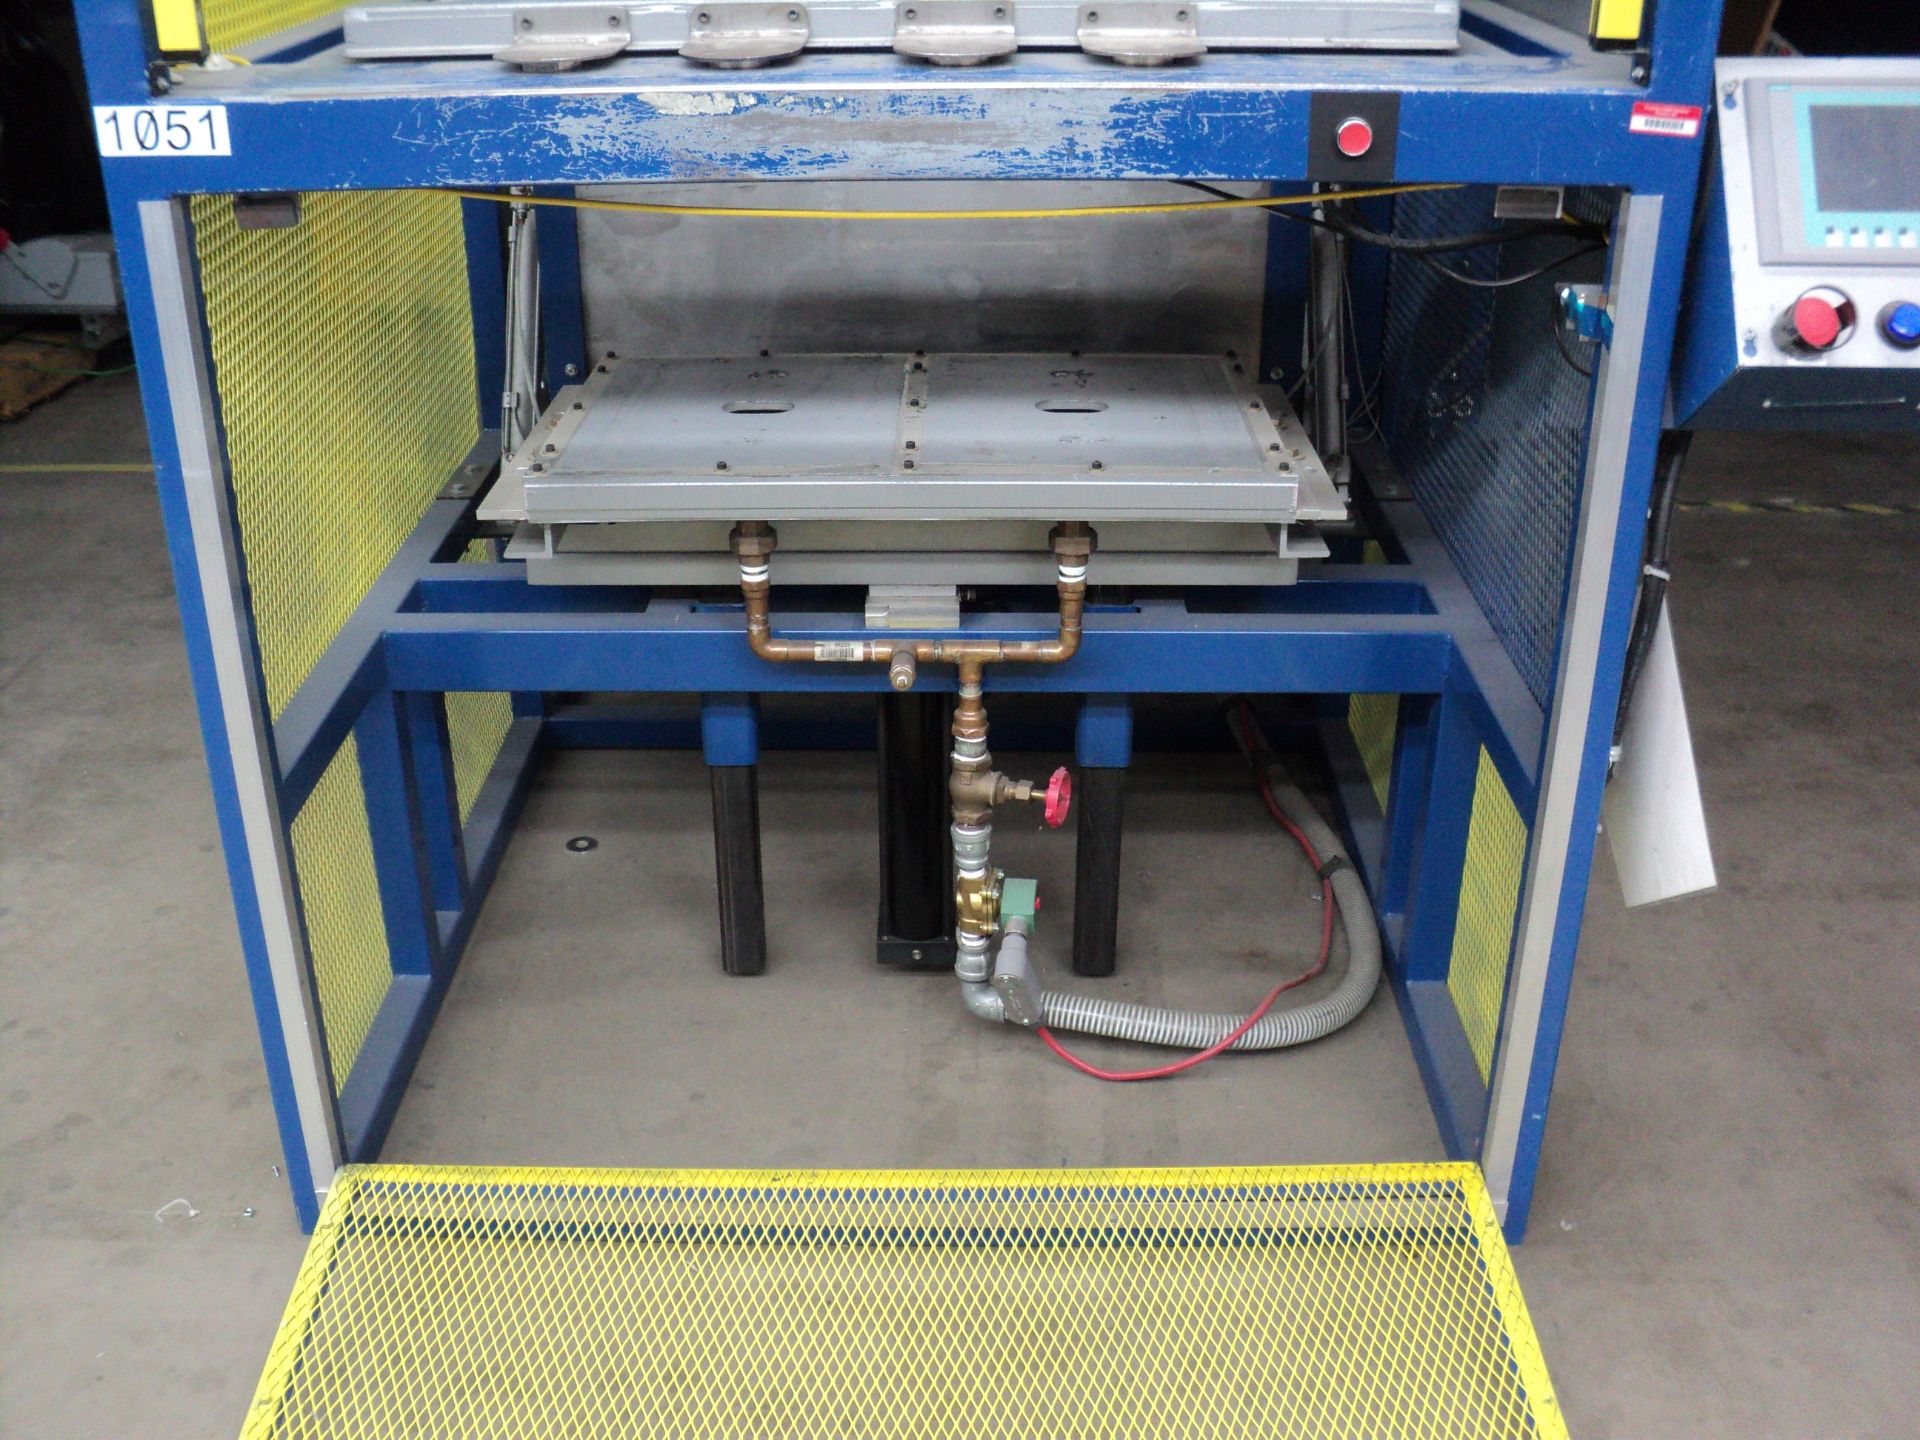 2012 BEL-O-VAC MDL. BV A CLASS, PLC FULL AUTO 24 X 38 PRODUCTION VACUUM FORMER, UNIT 1051 (THIS ITEM - Image 3 of 5